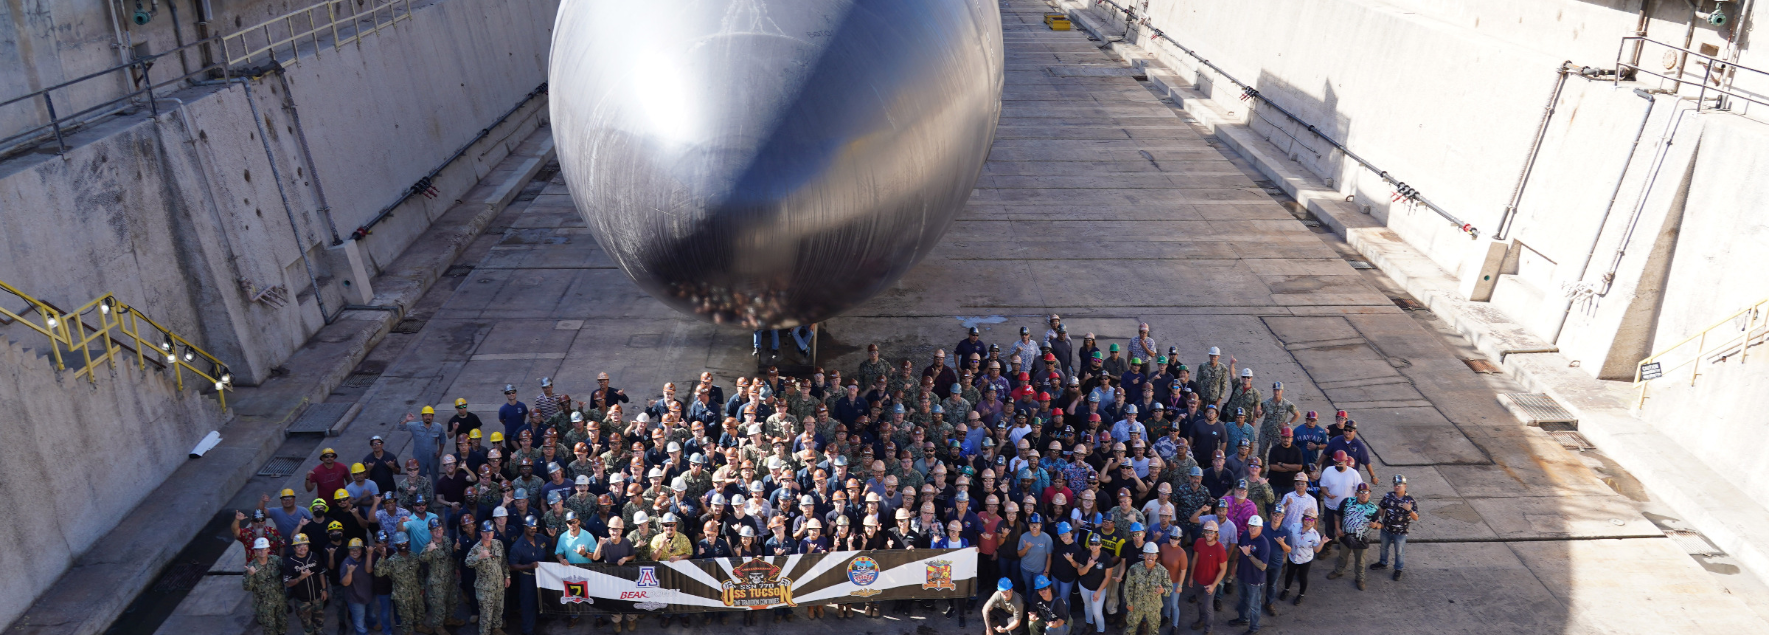 People stand with a banner in front of submarine USS Tucson in a dry dock at Perl Harbor Naval Shipyard